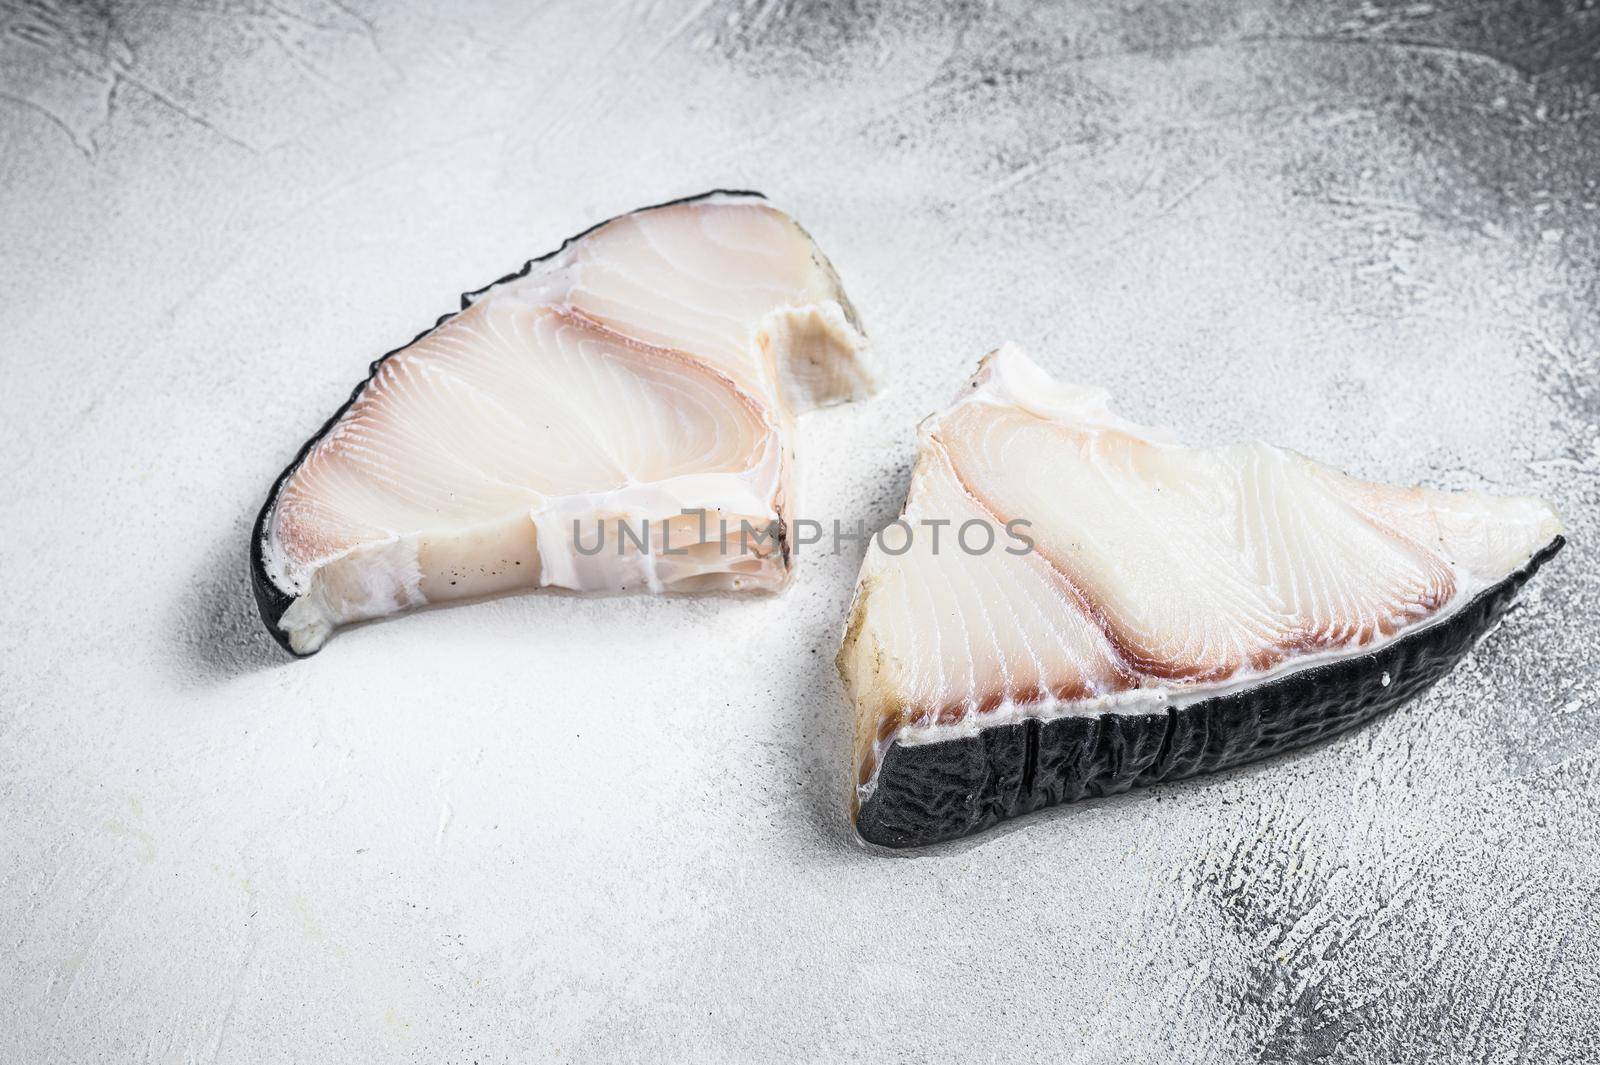 Raw Shark fish steaks on a kitchen table. White background. Top view.